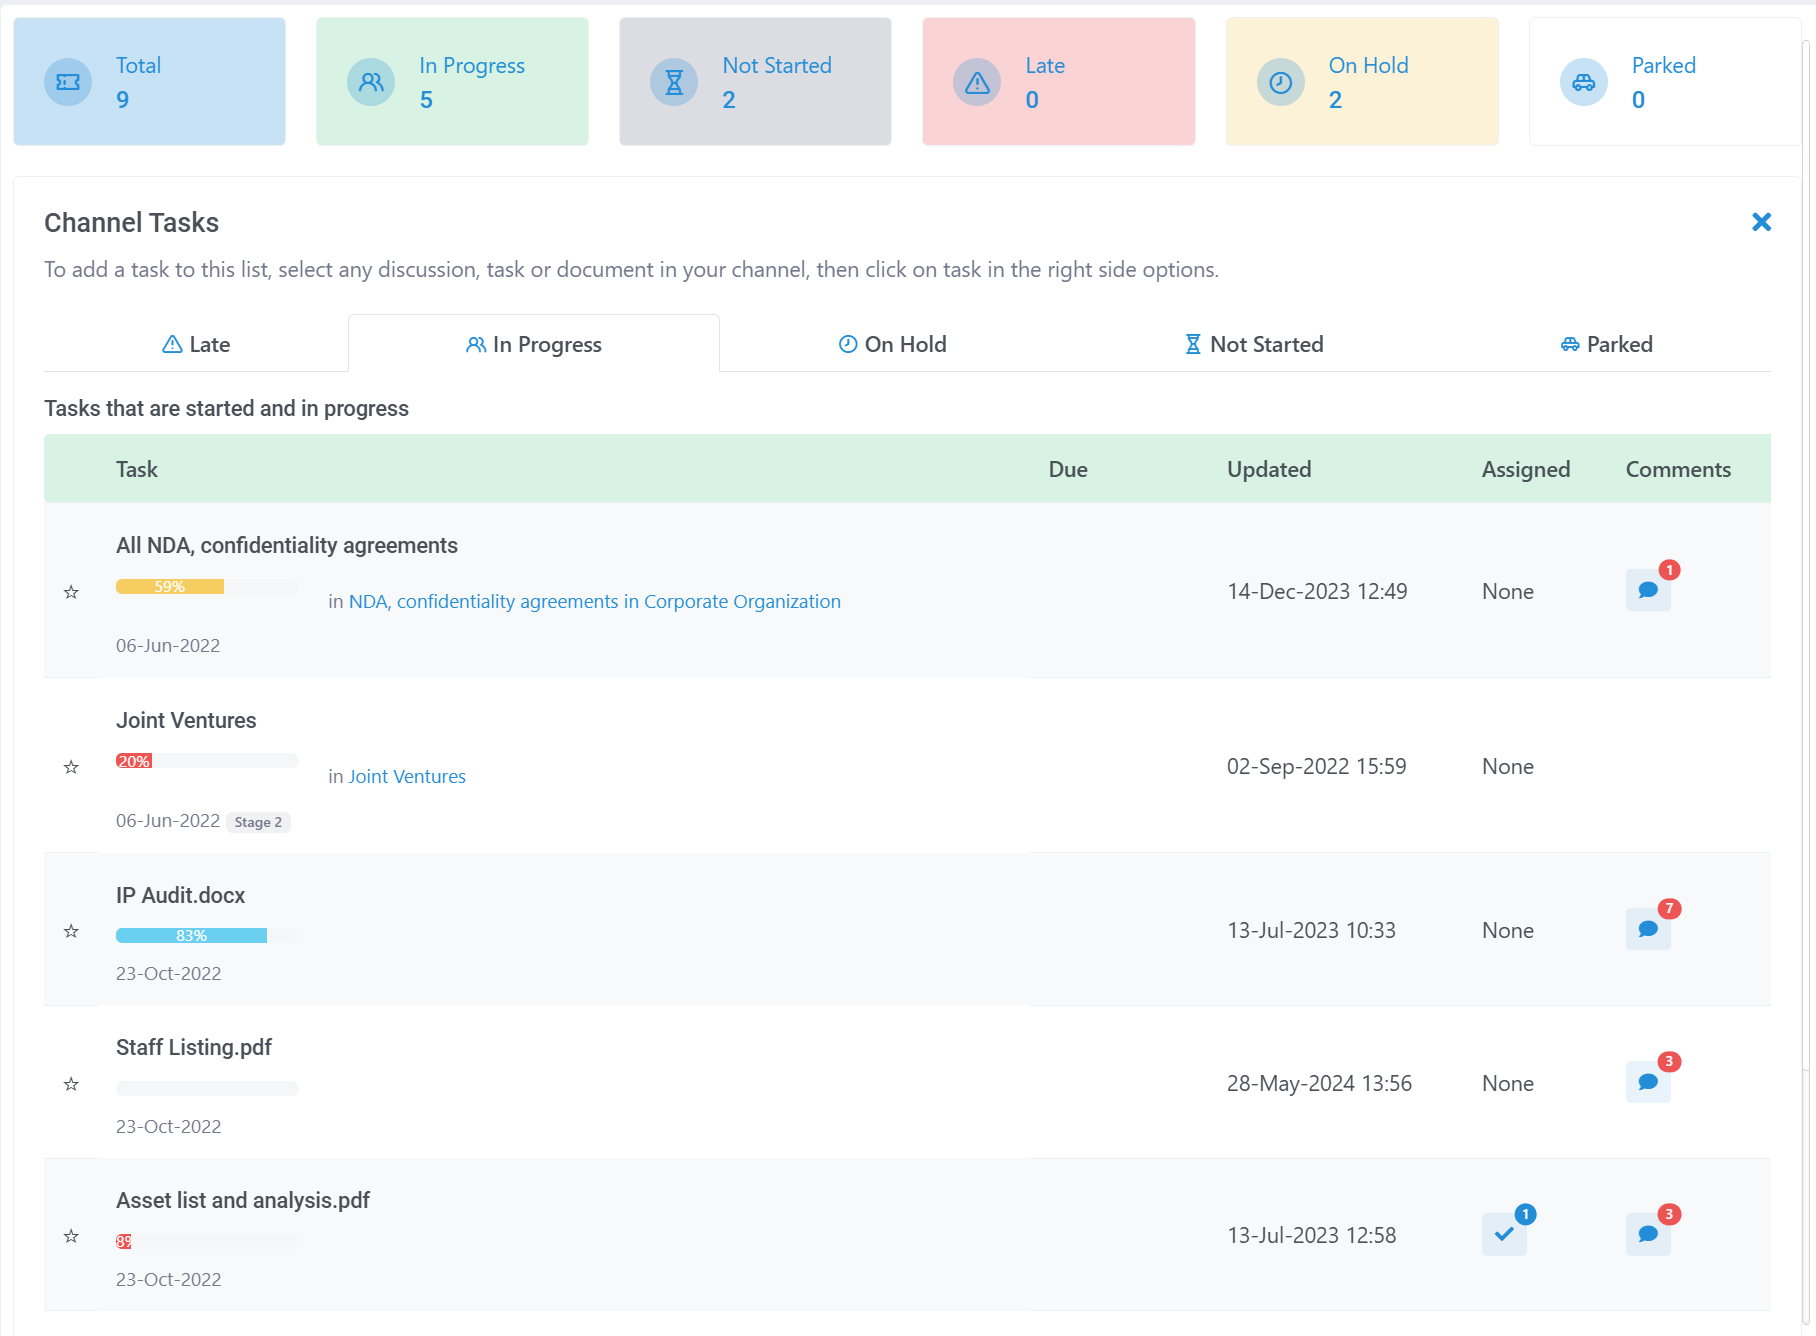 Track your tasks and progress